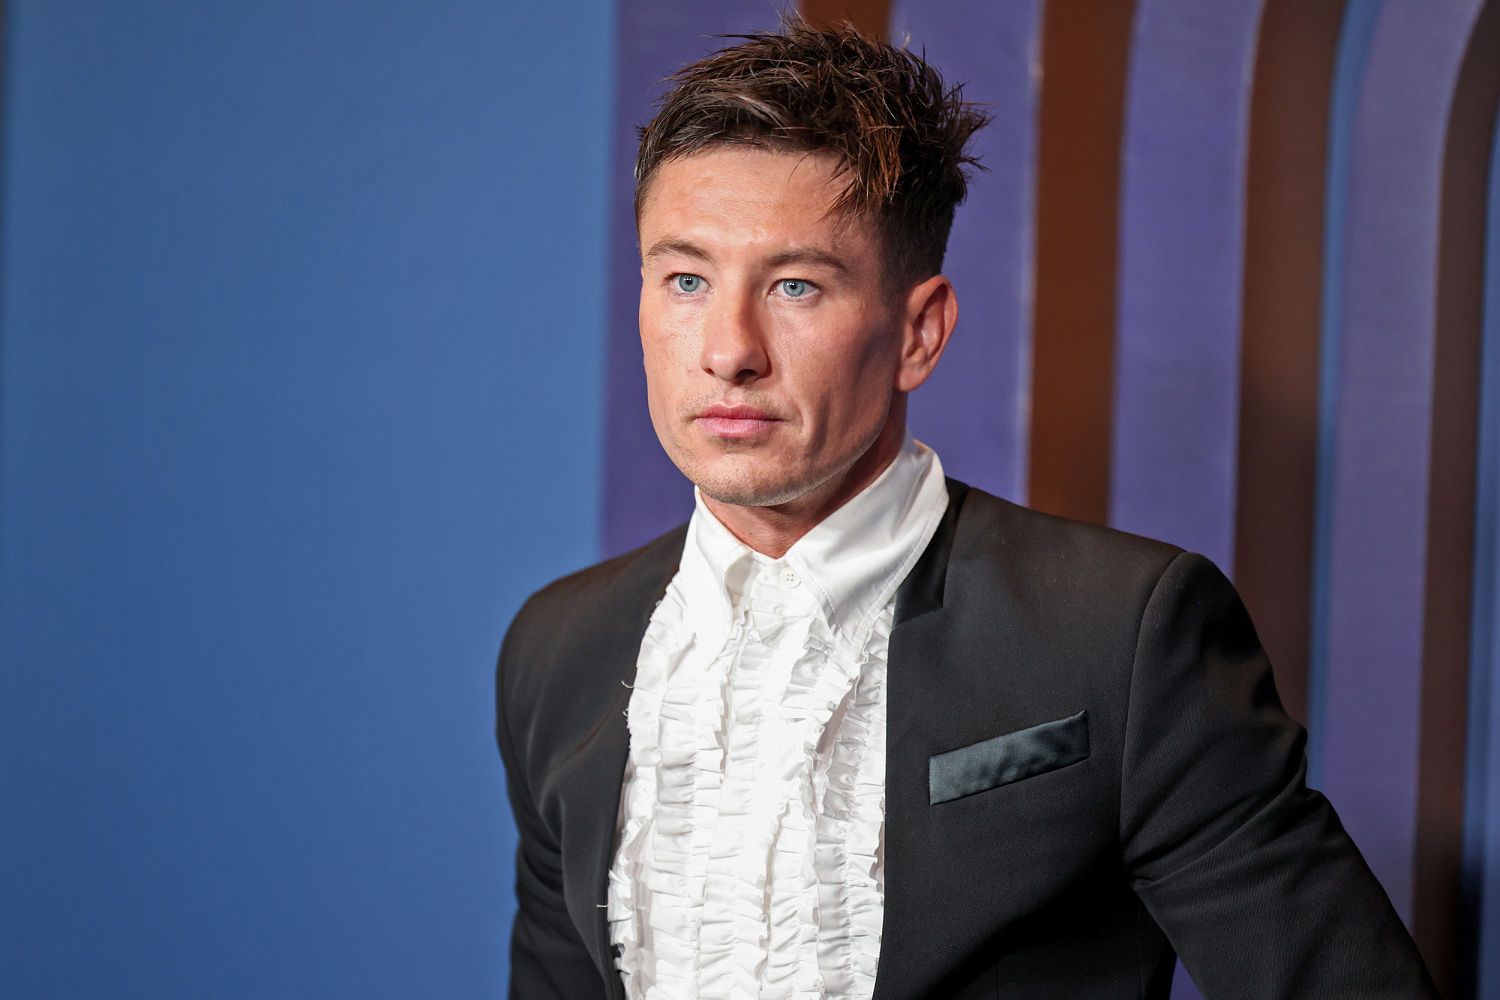 'Saltburn' star Barry Keoghan nearly lost his arm to flesh-eating bacteria